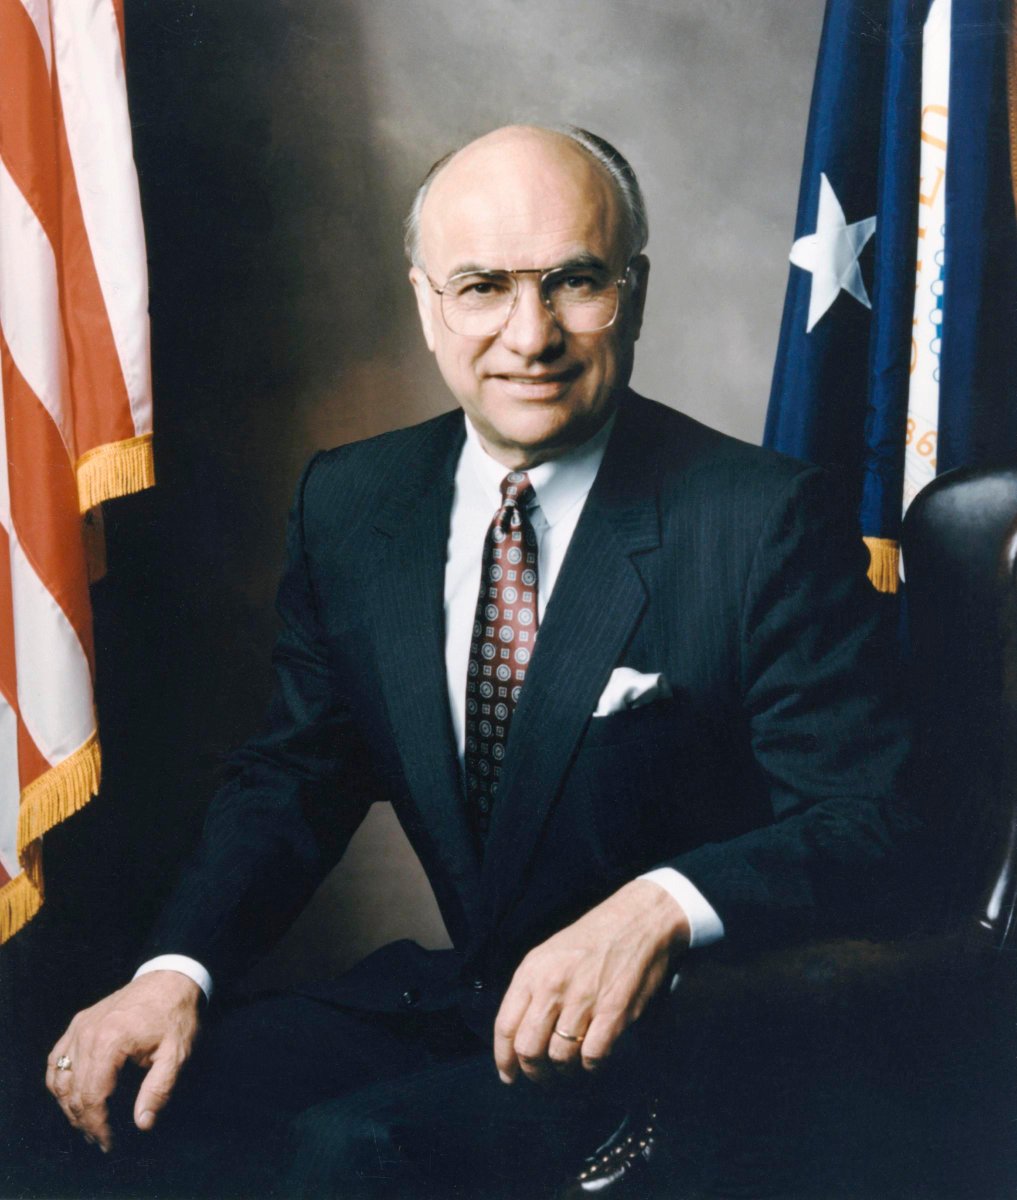 #19 Clayton Yeutter - The guy behind modern handling requirements for eggs to prevent food-borne illnesses, Clayton Yeutter was a nerd about agricultural policy. Sadly, his term was marred by the reduction of Conservation Reserve Programs.